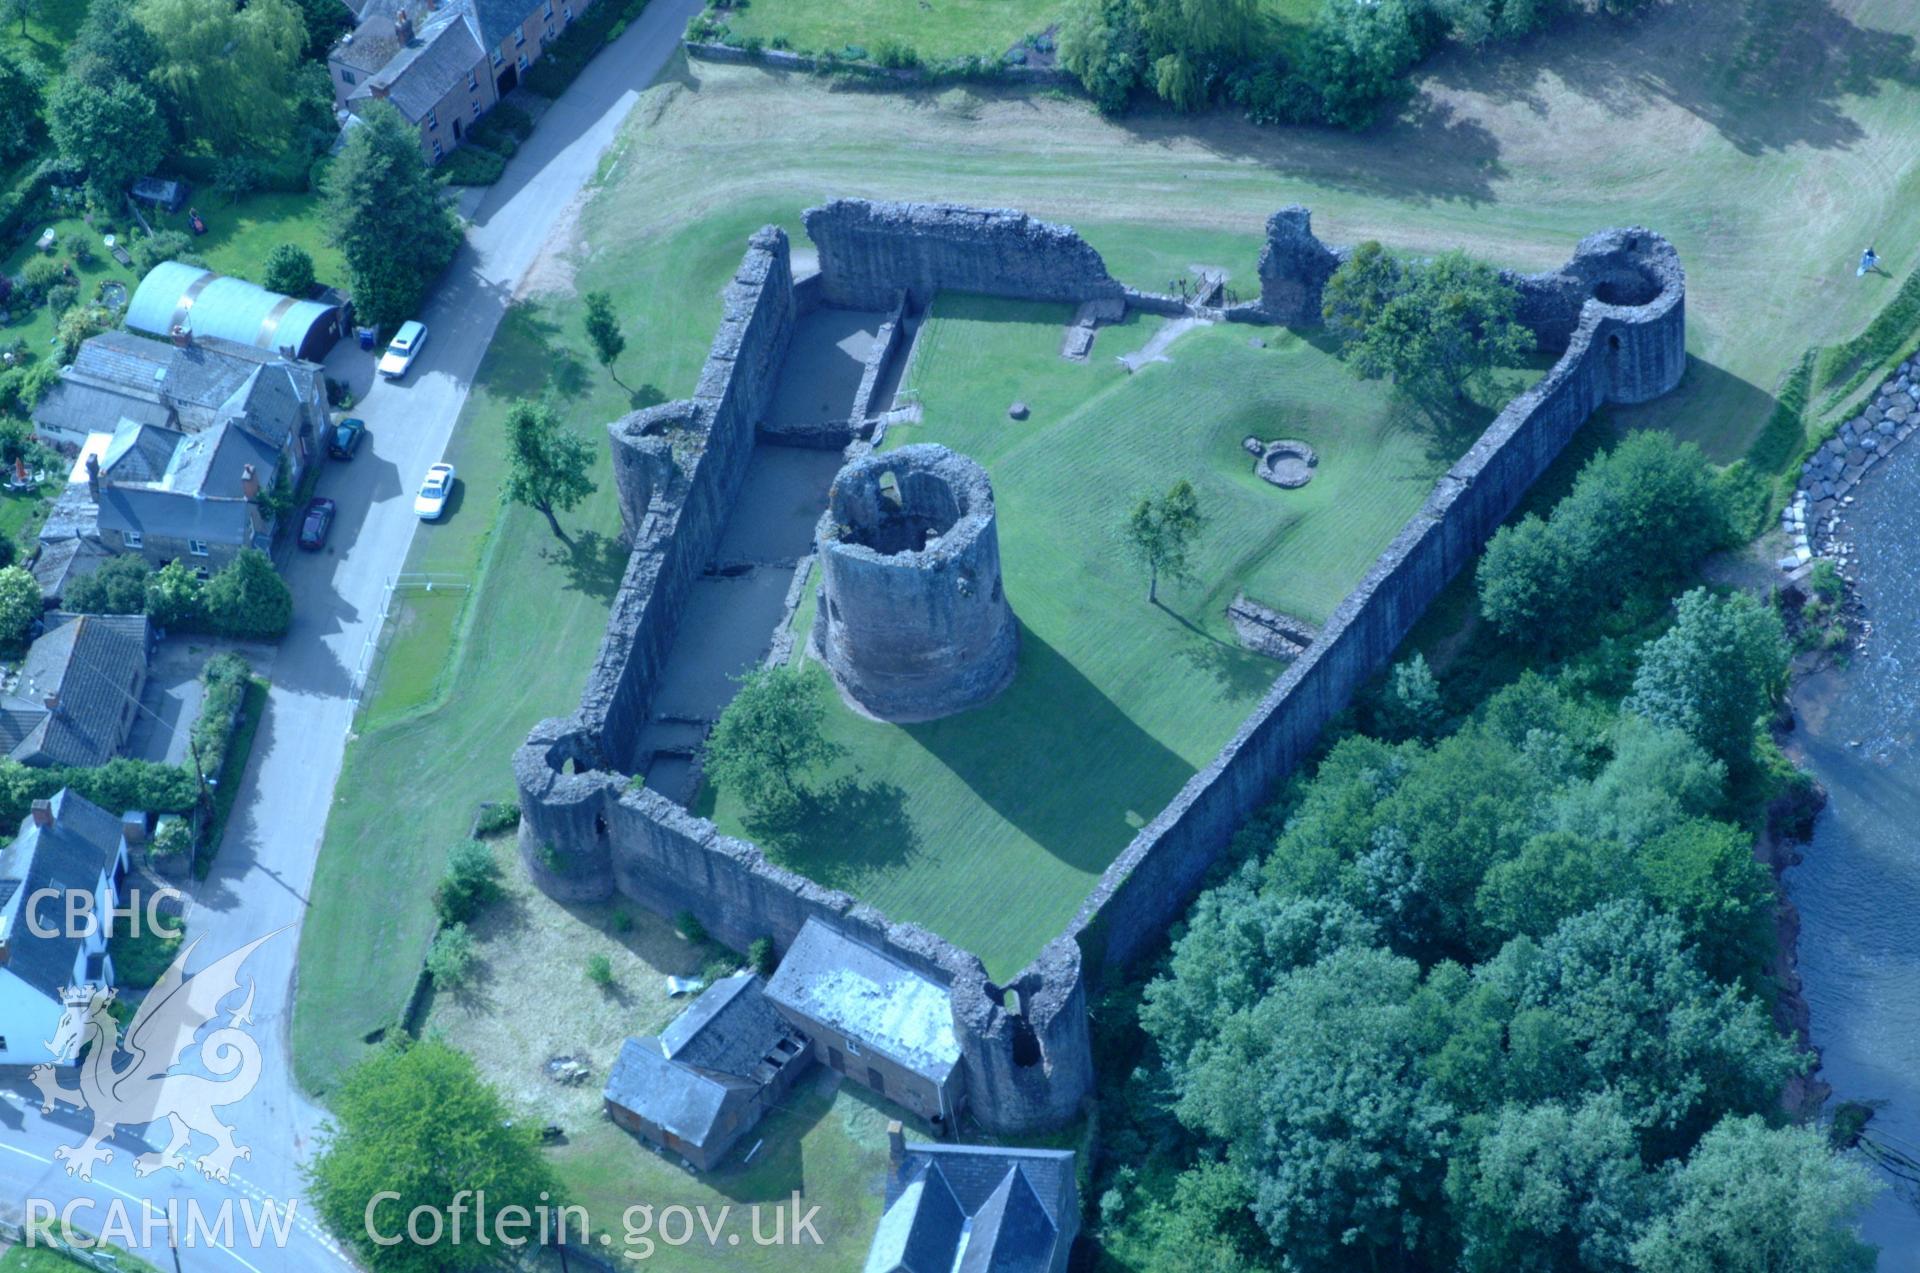 RCAHMW colour oblique aerial photograph of Skenfrith castle taken on 02/06/2004 by Toby Driver